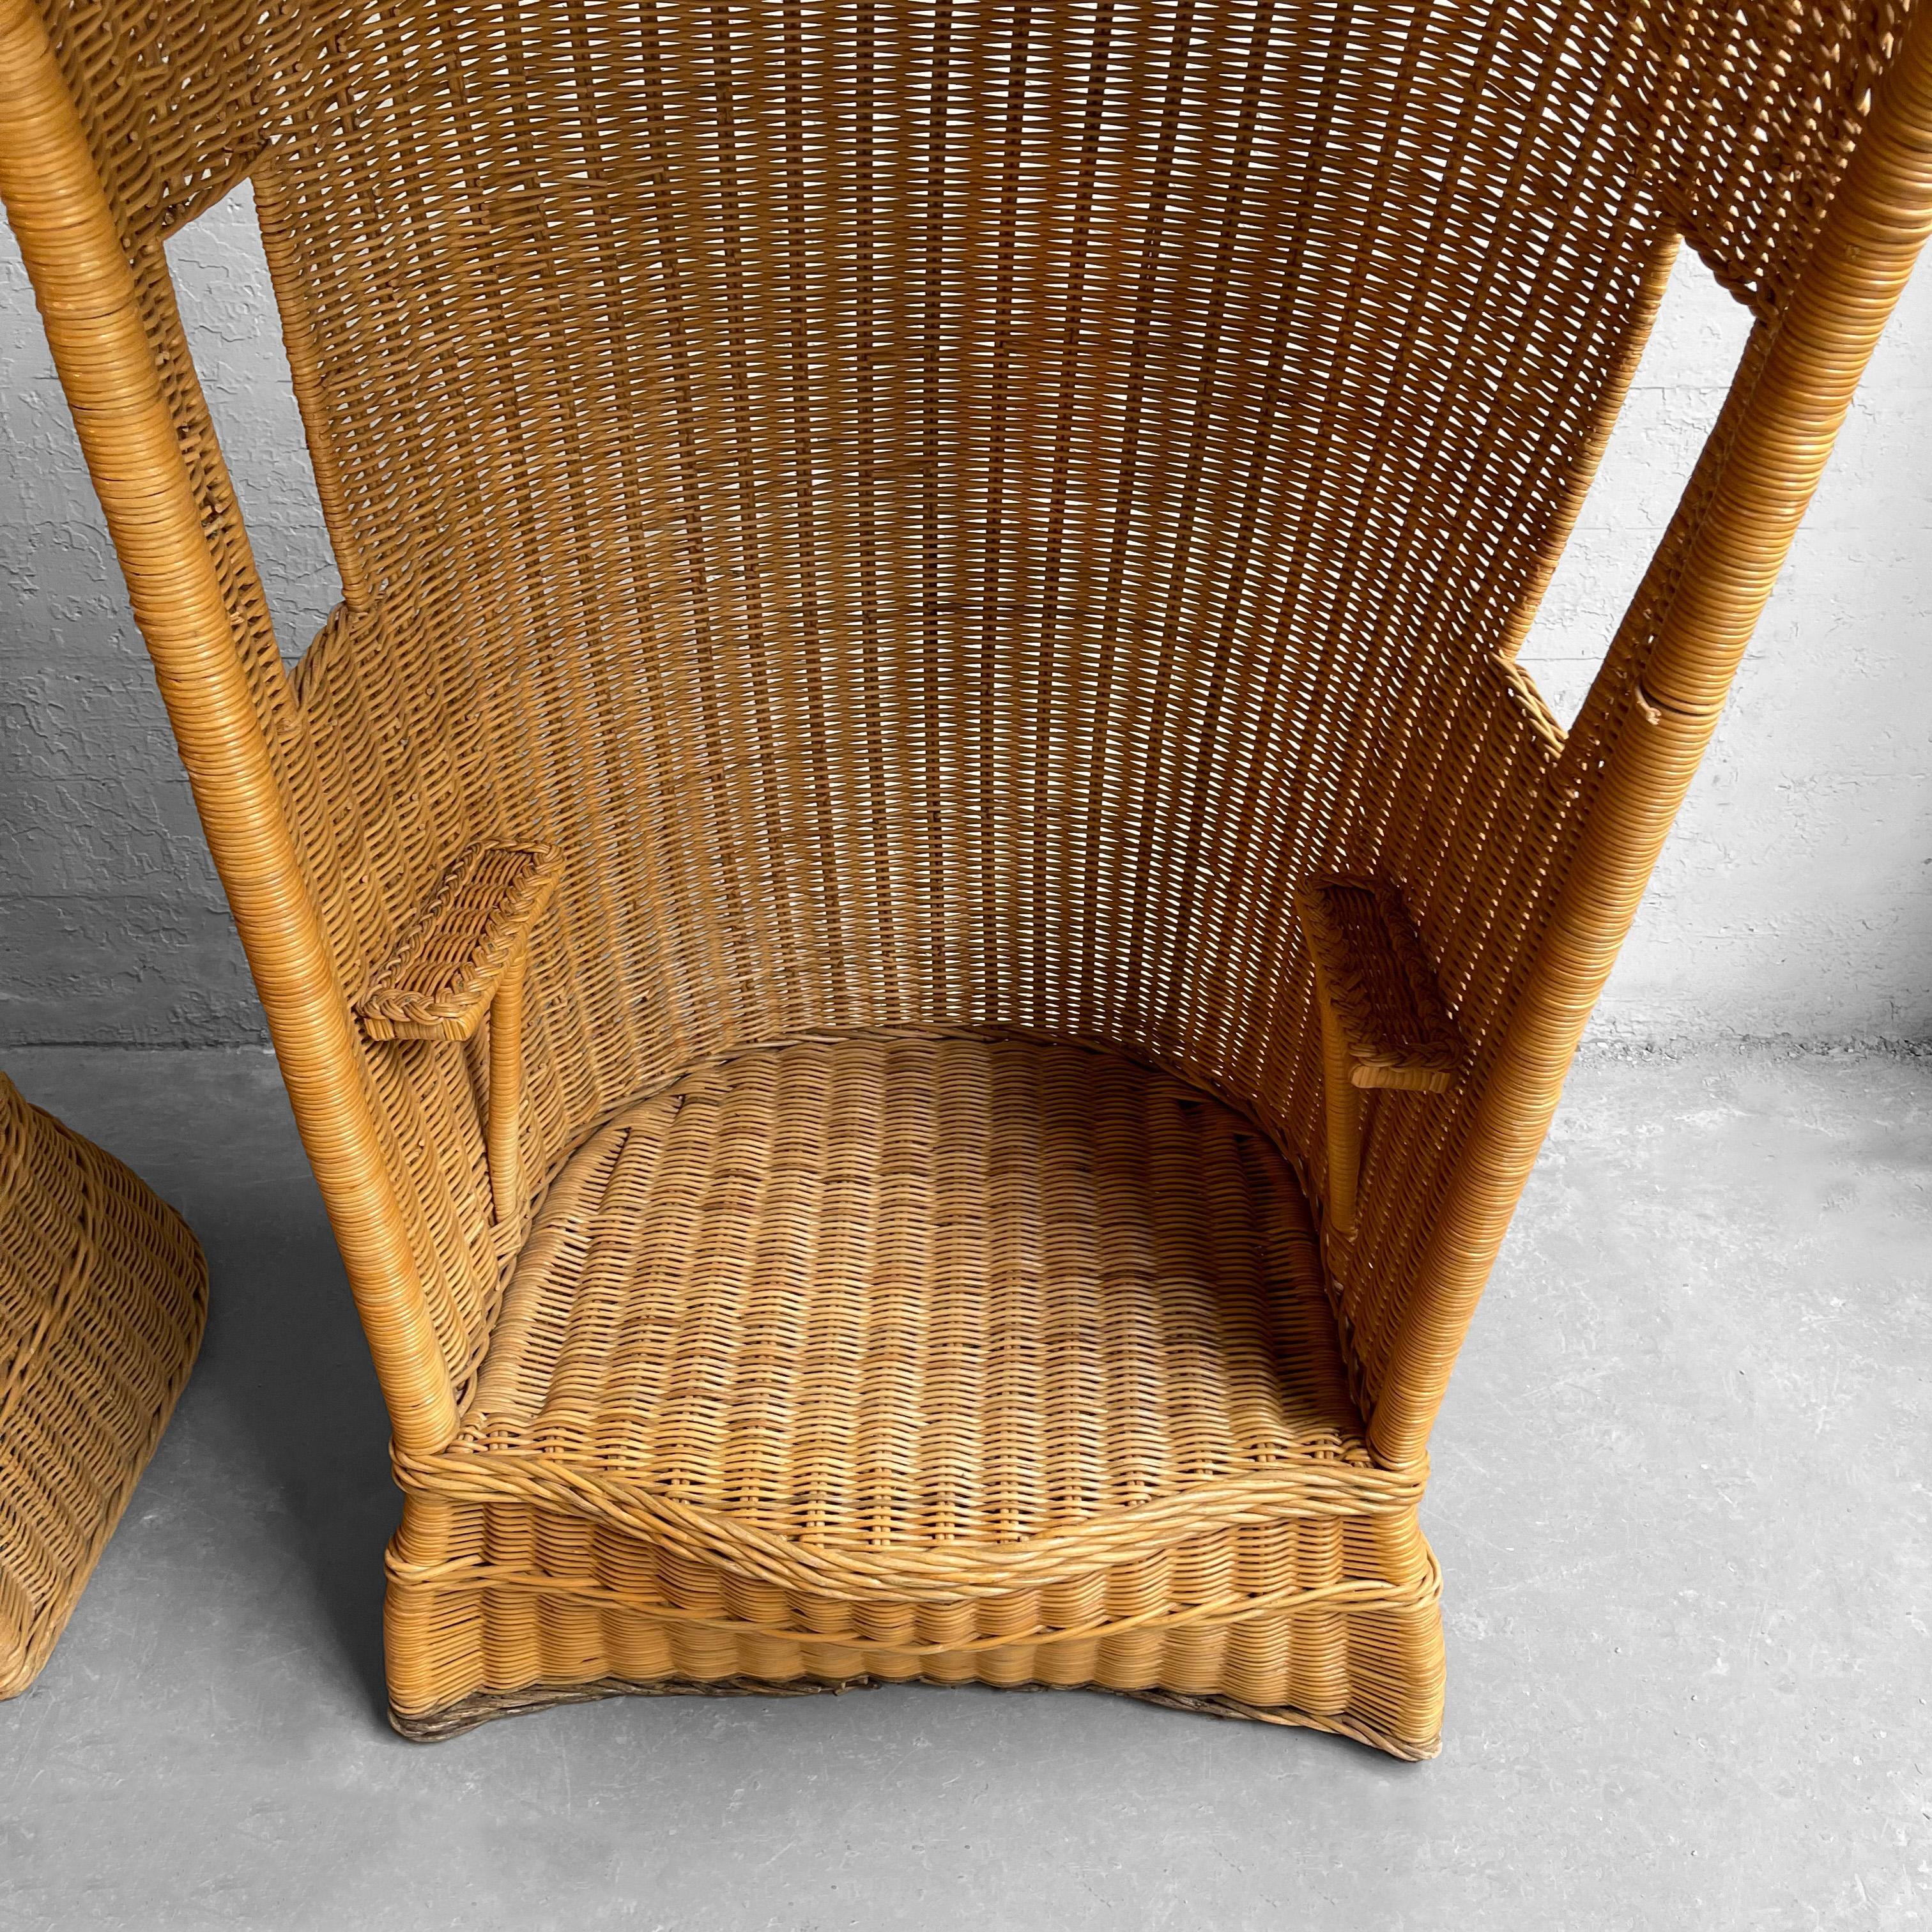 Pair Of Woven Wicker Porter's Chairs 5